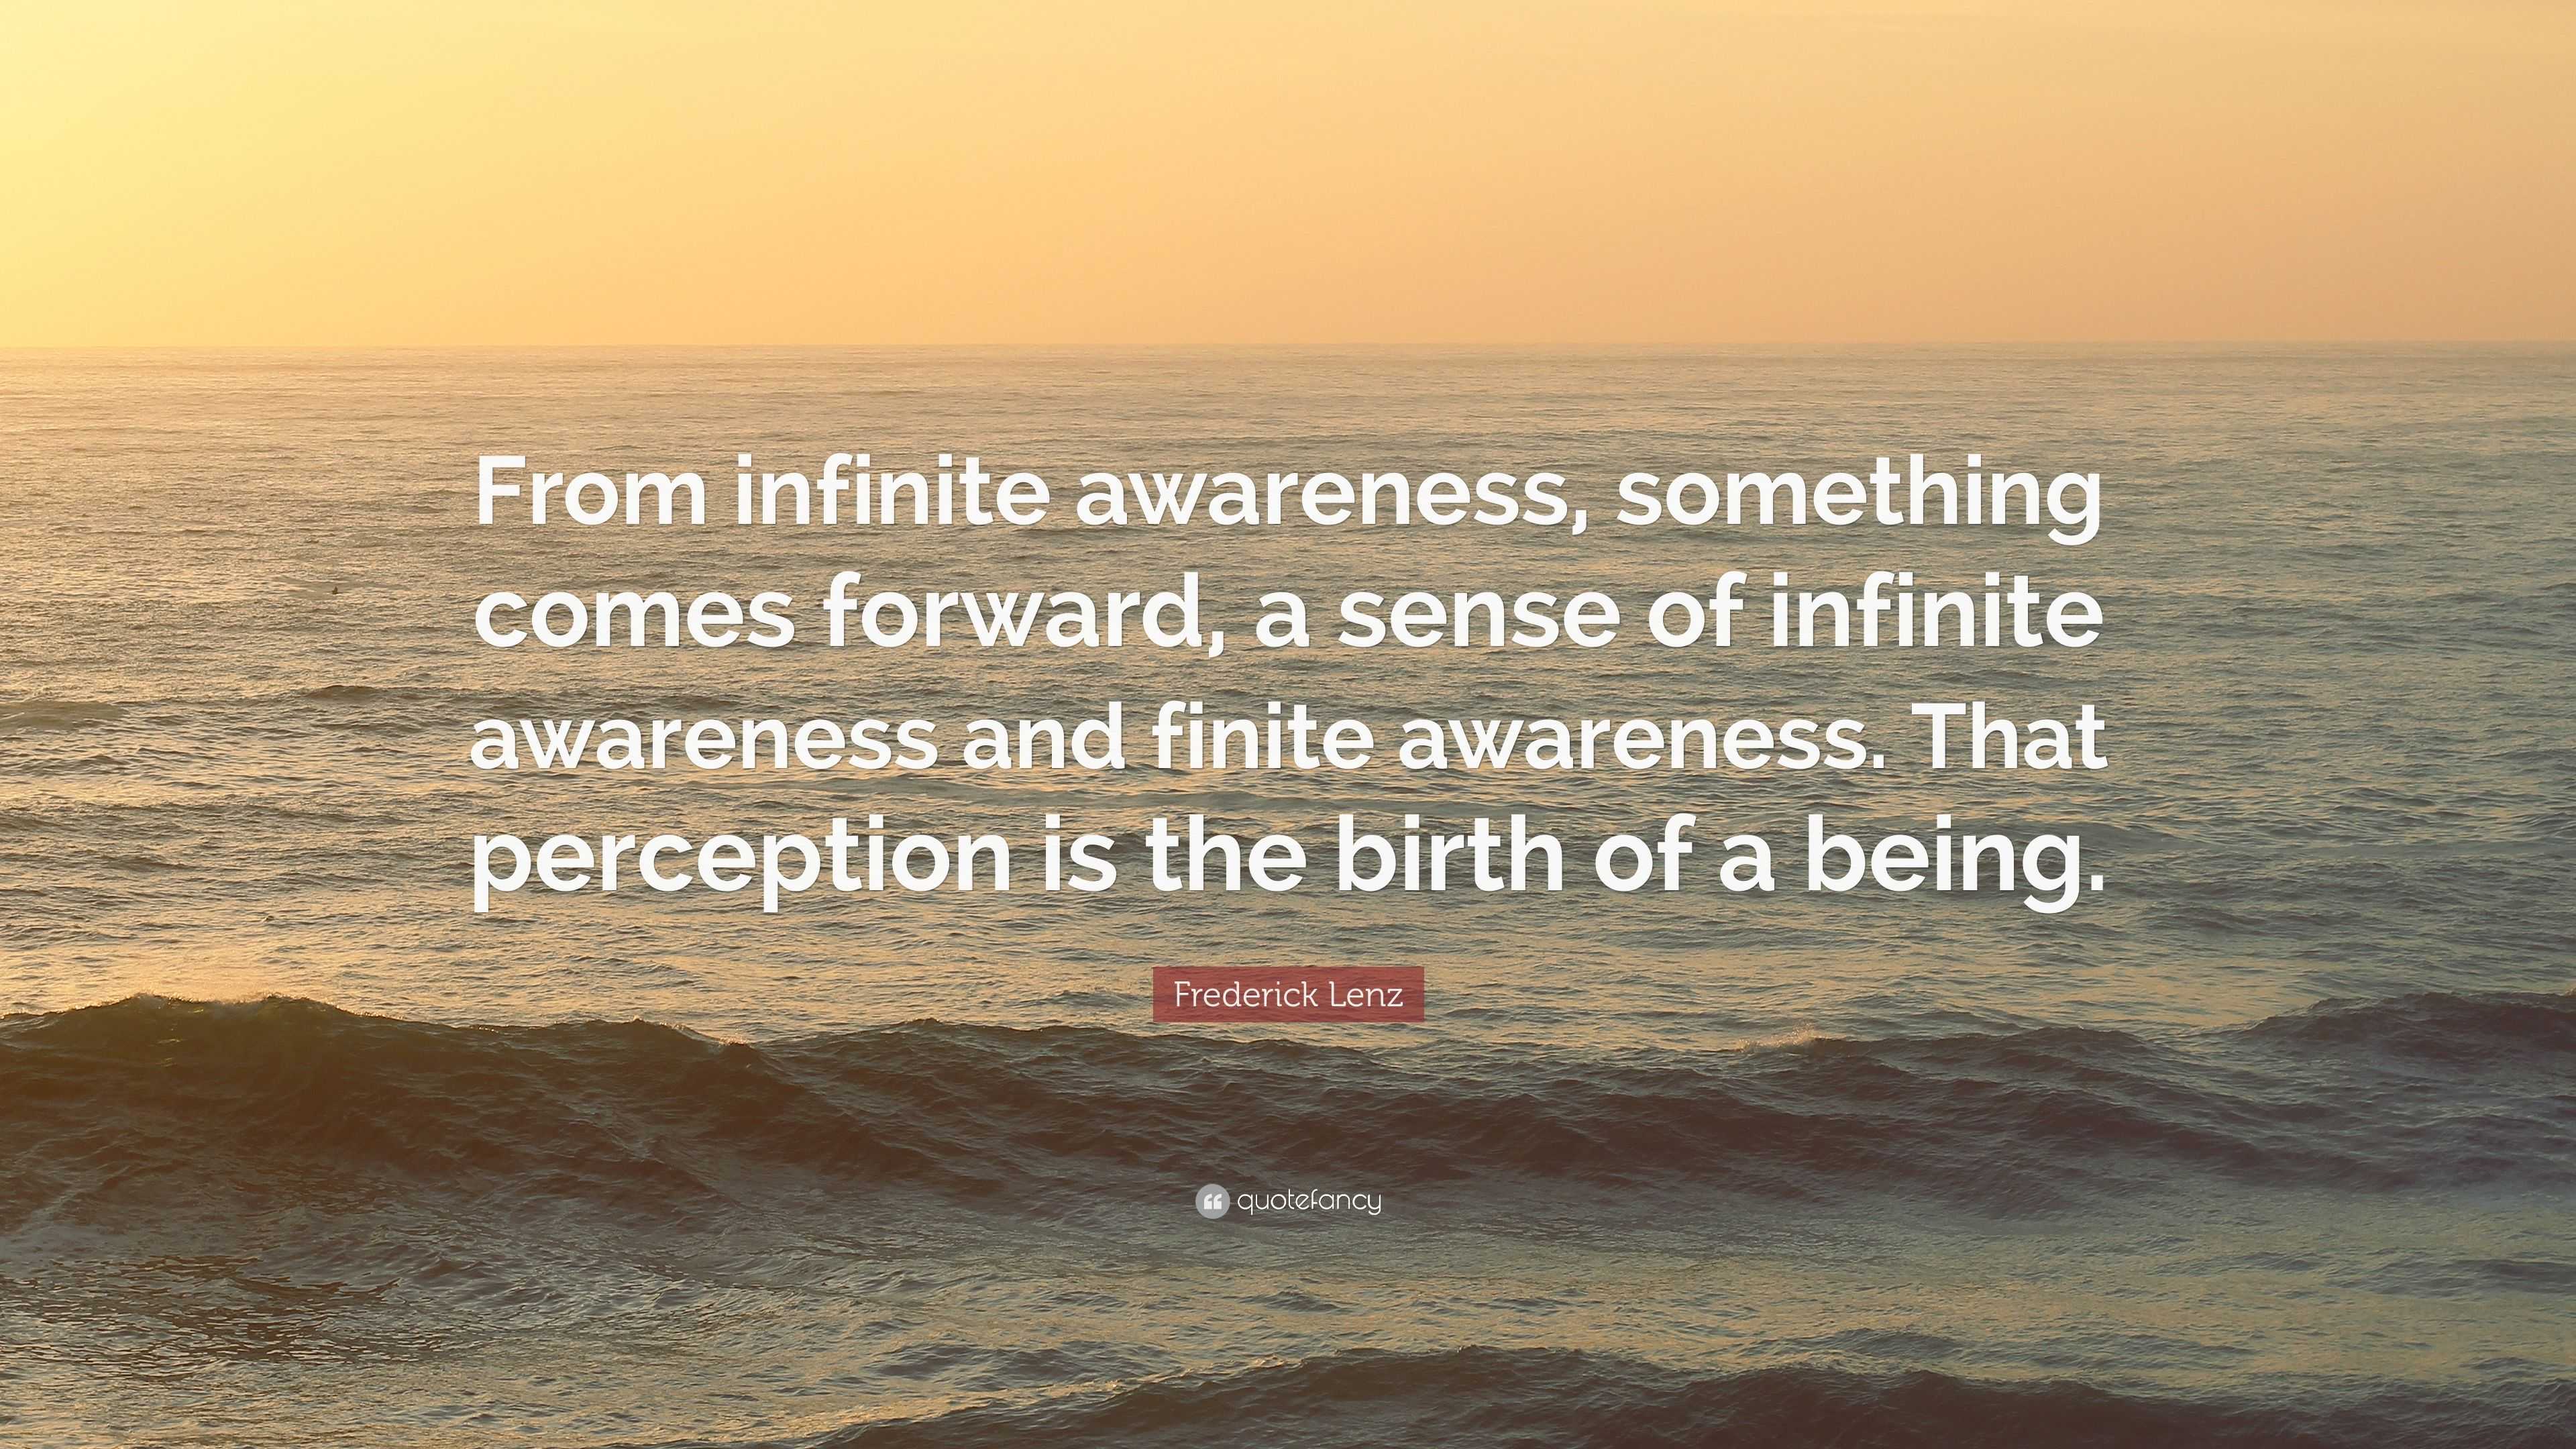 Frederick Lenz Quote: “From infinite awareness, something comes forward ...